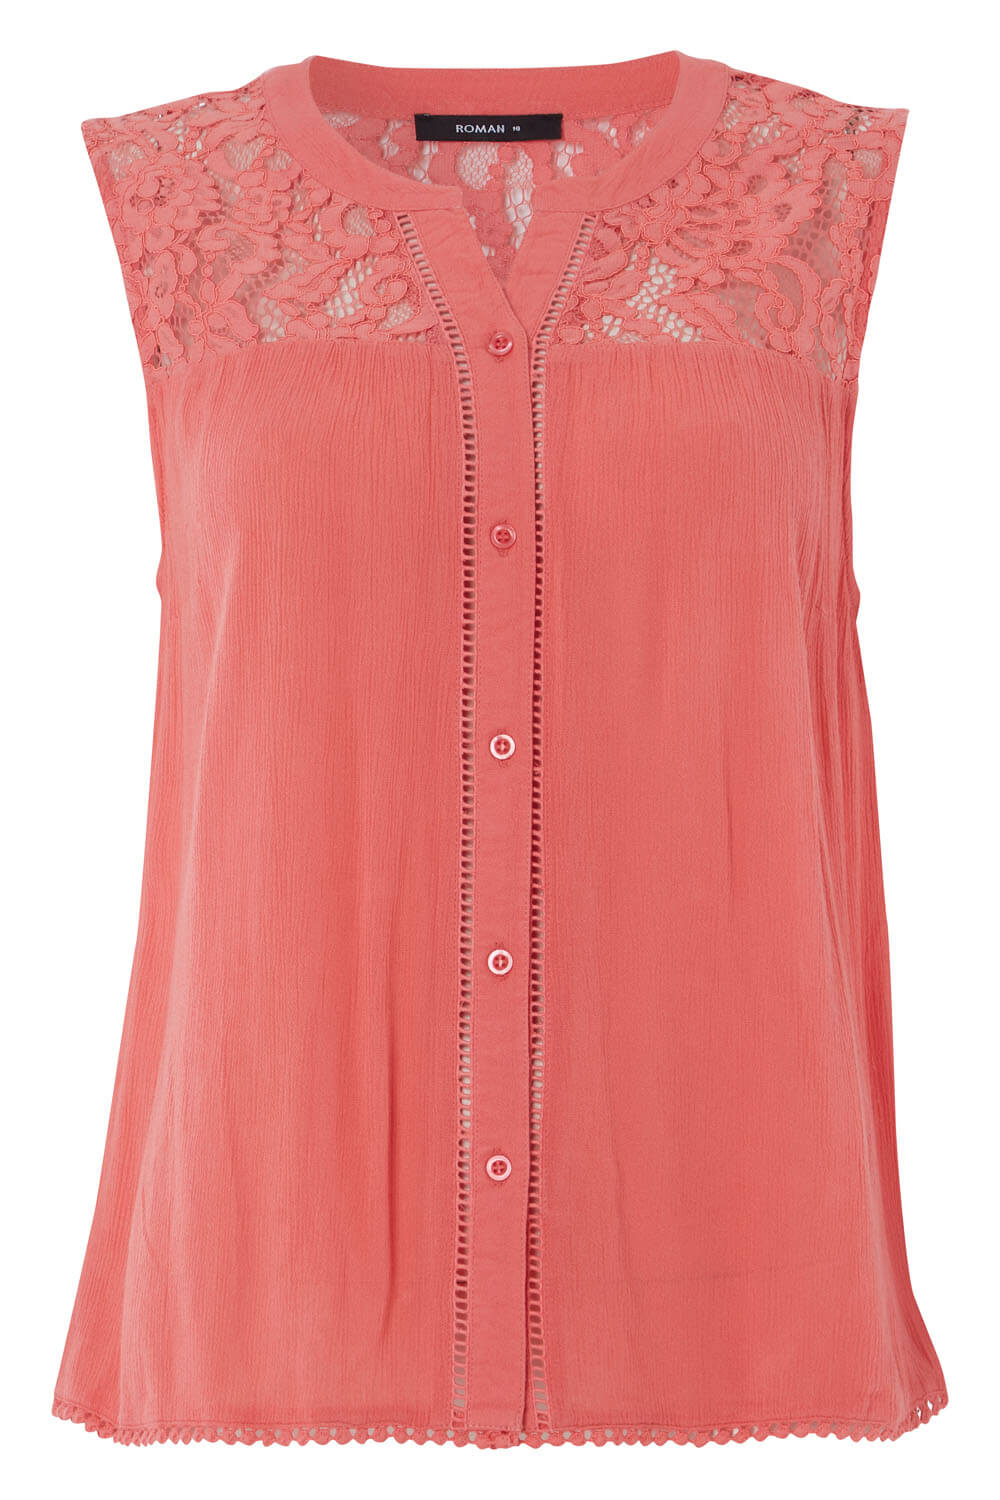 CORAL Lace Insert Button Up Blouse, Image 4 of 8